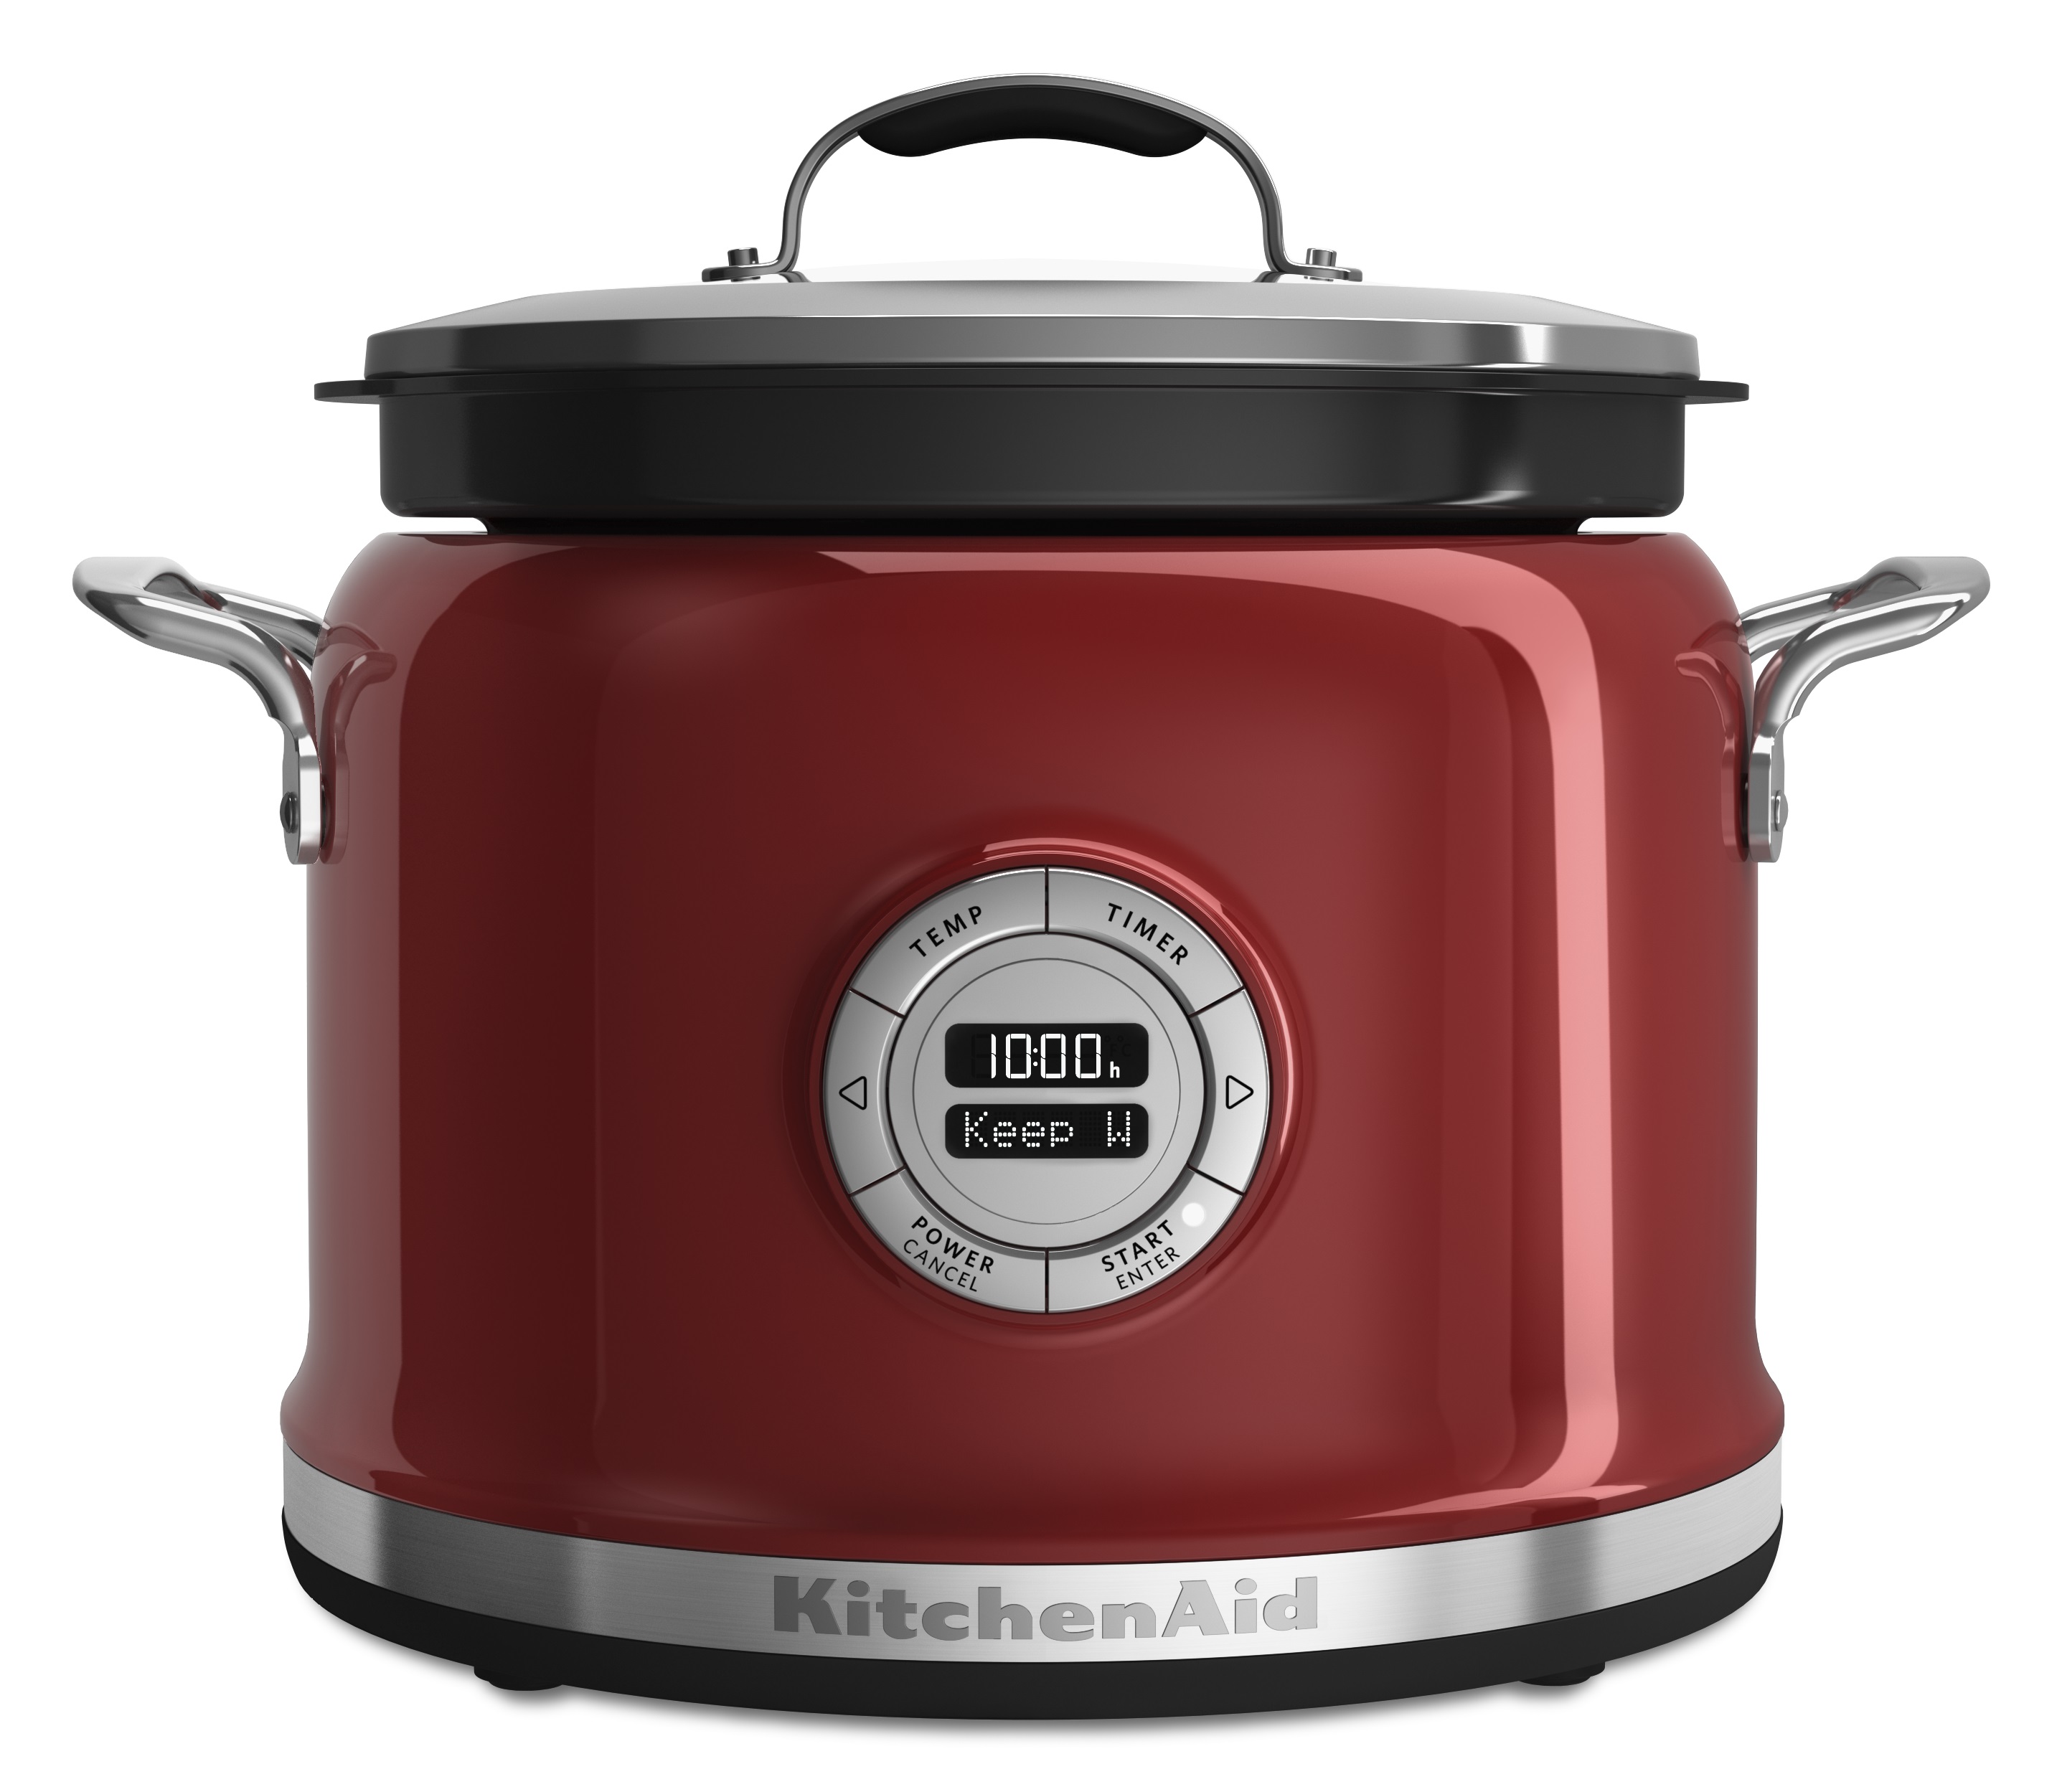 KitchenAid® multi-cooker offers cooks extra help